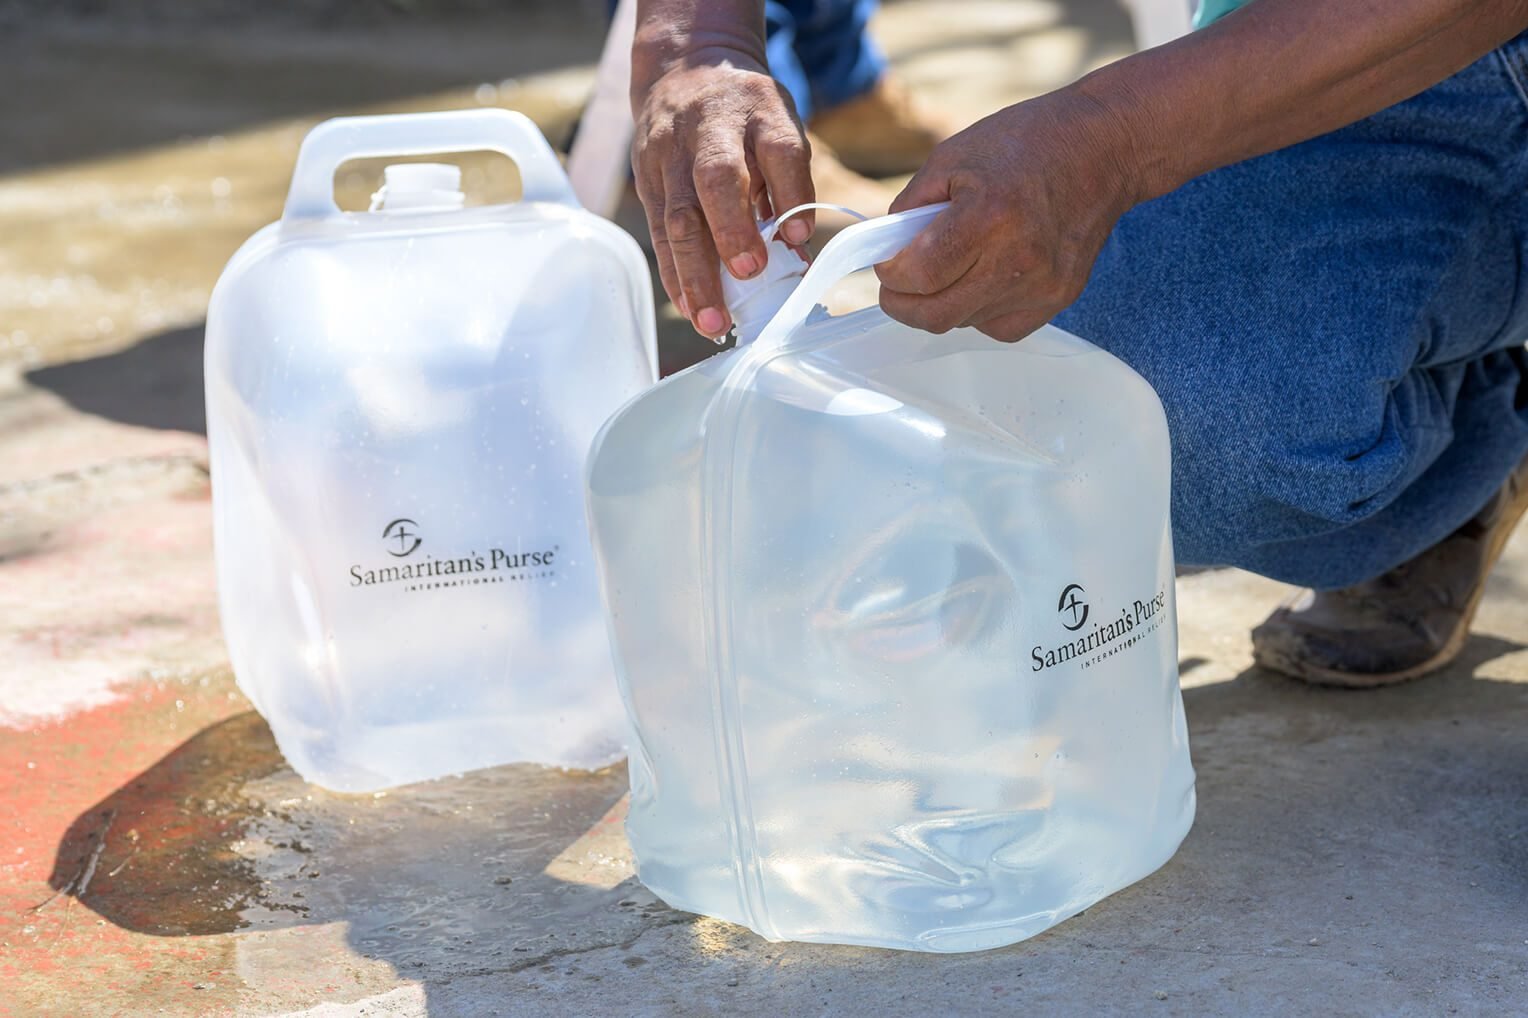 Samaritan’s Purse water systems throughout Acapulco are poised to supply water for up to 60,000 people per day.